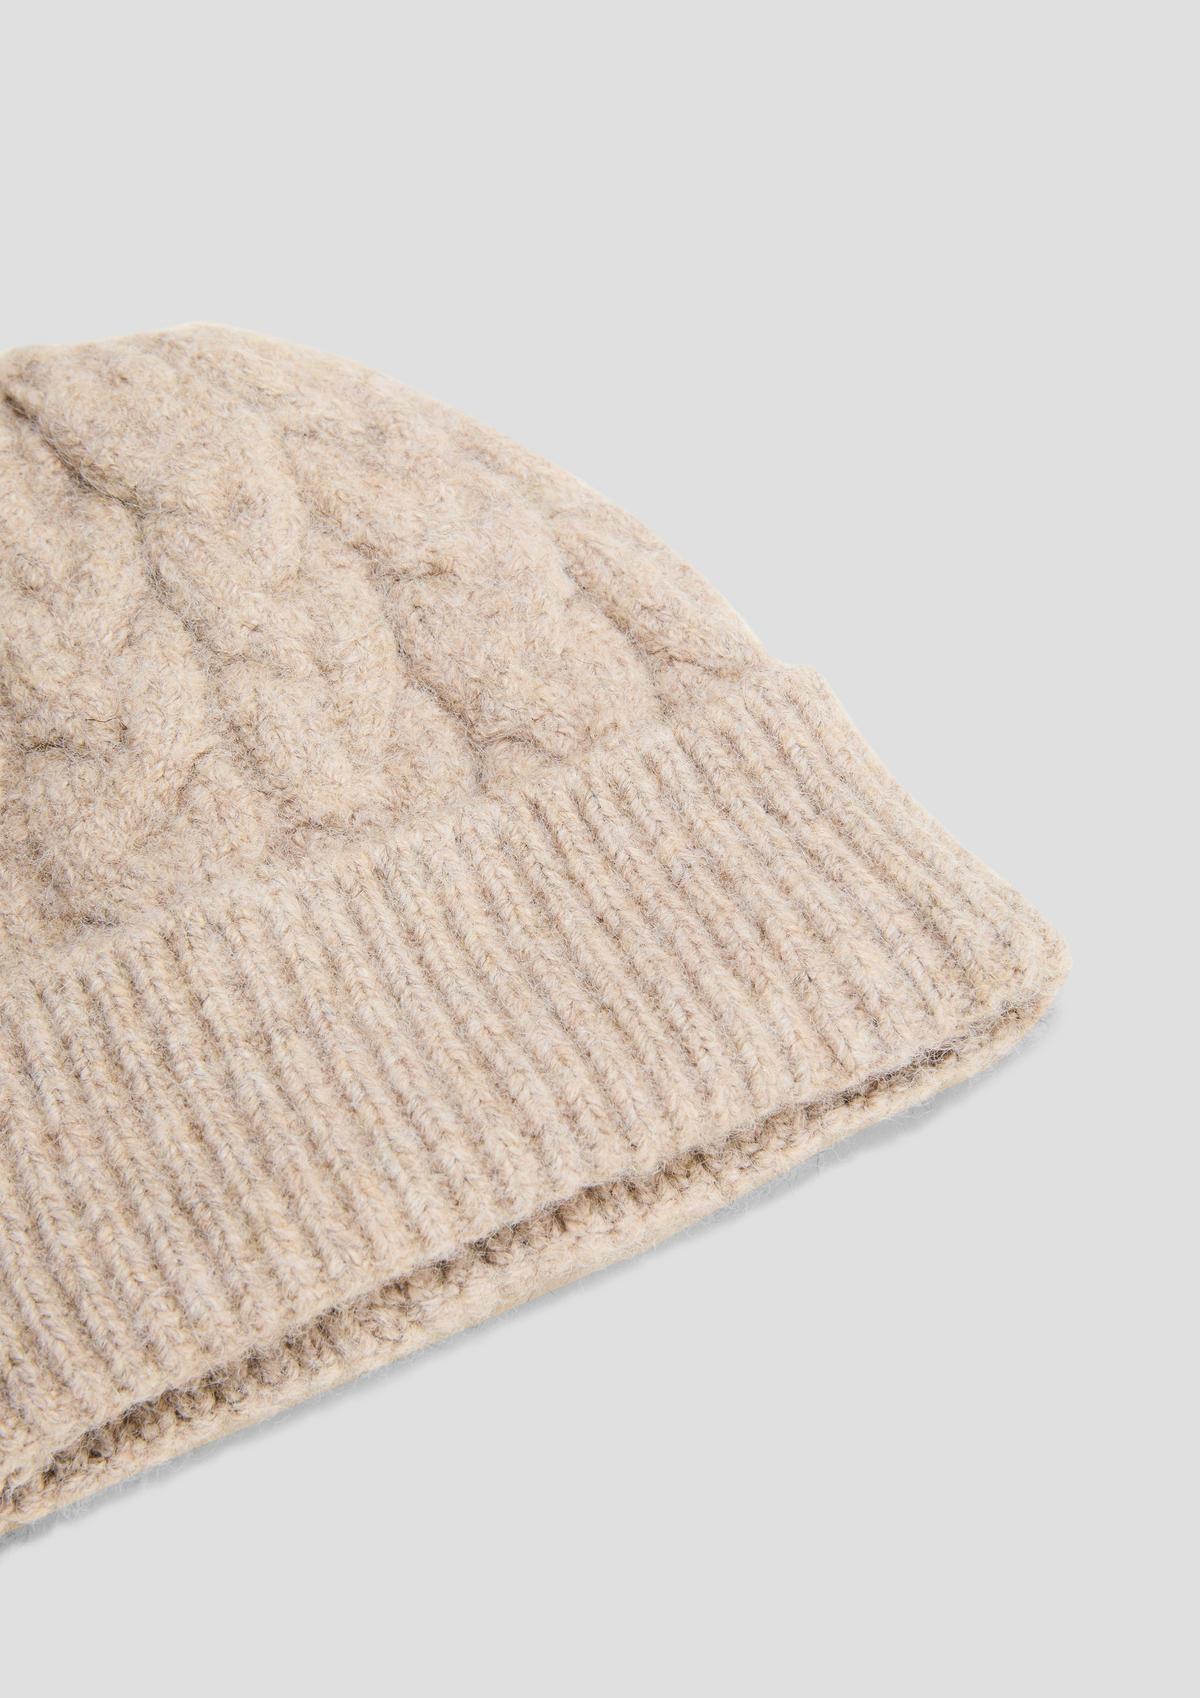 s.Oliver Cotton blend knitted hat